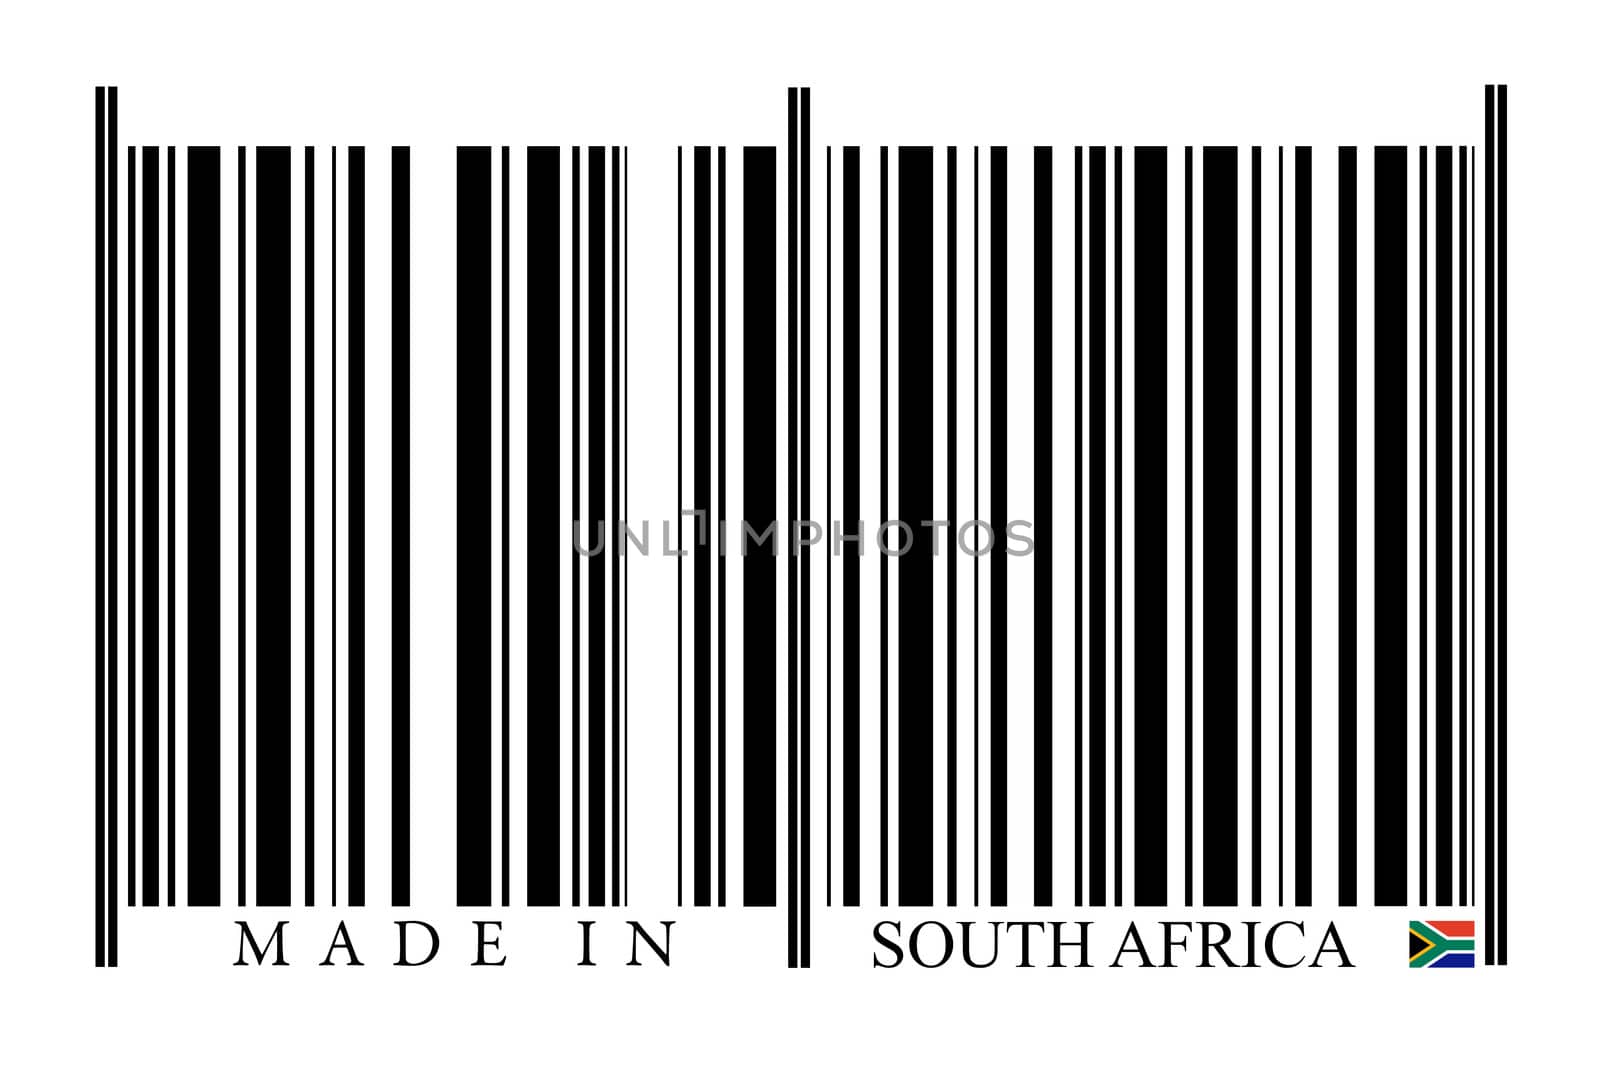 South Africa Barcode by gemenacom